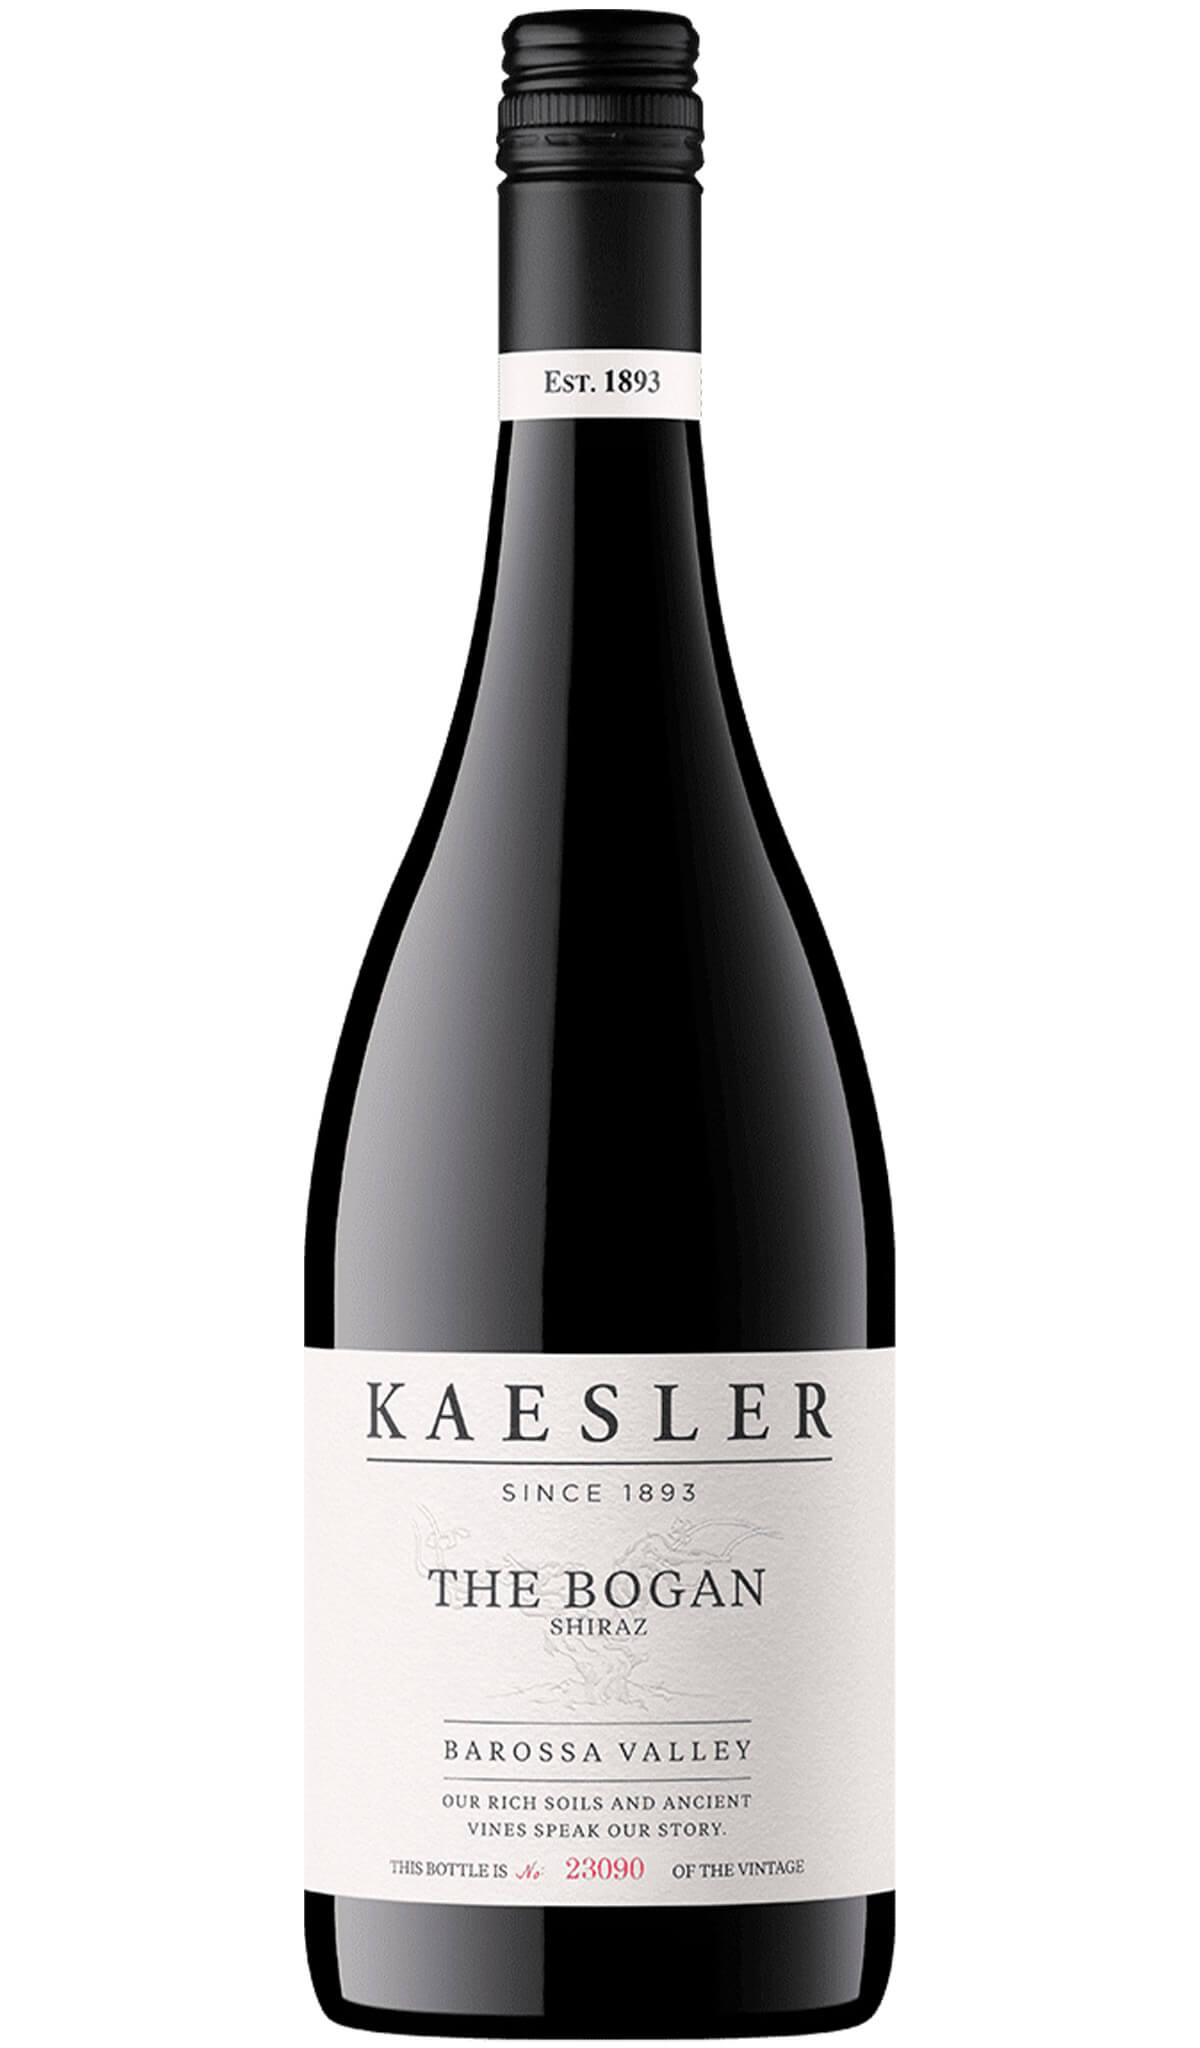 Find out more or buy Kaesler The Bogan Shiraz 2021 (Barossa Valley) online at Wine Sellers Direct - Australia’s independent liquor specialists.